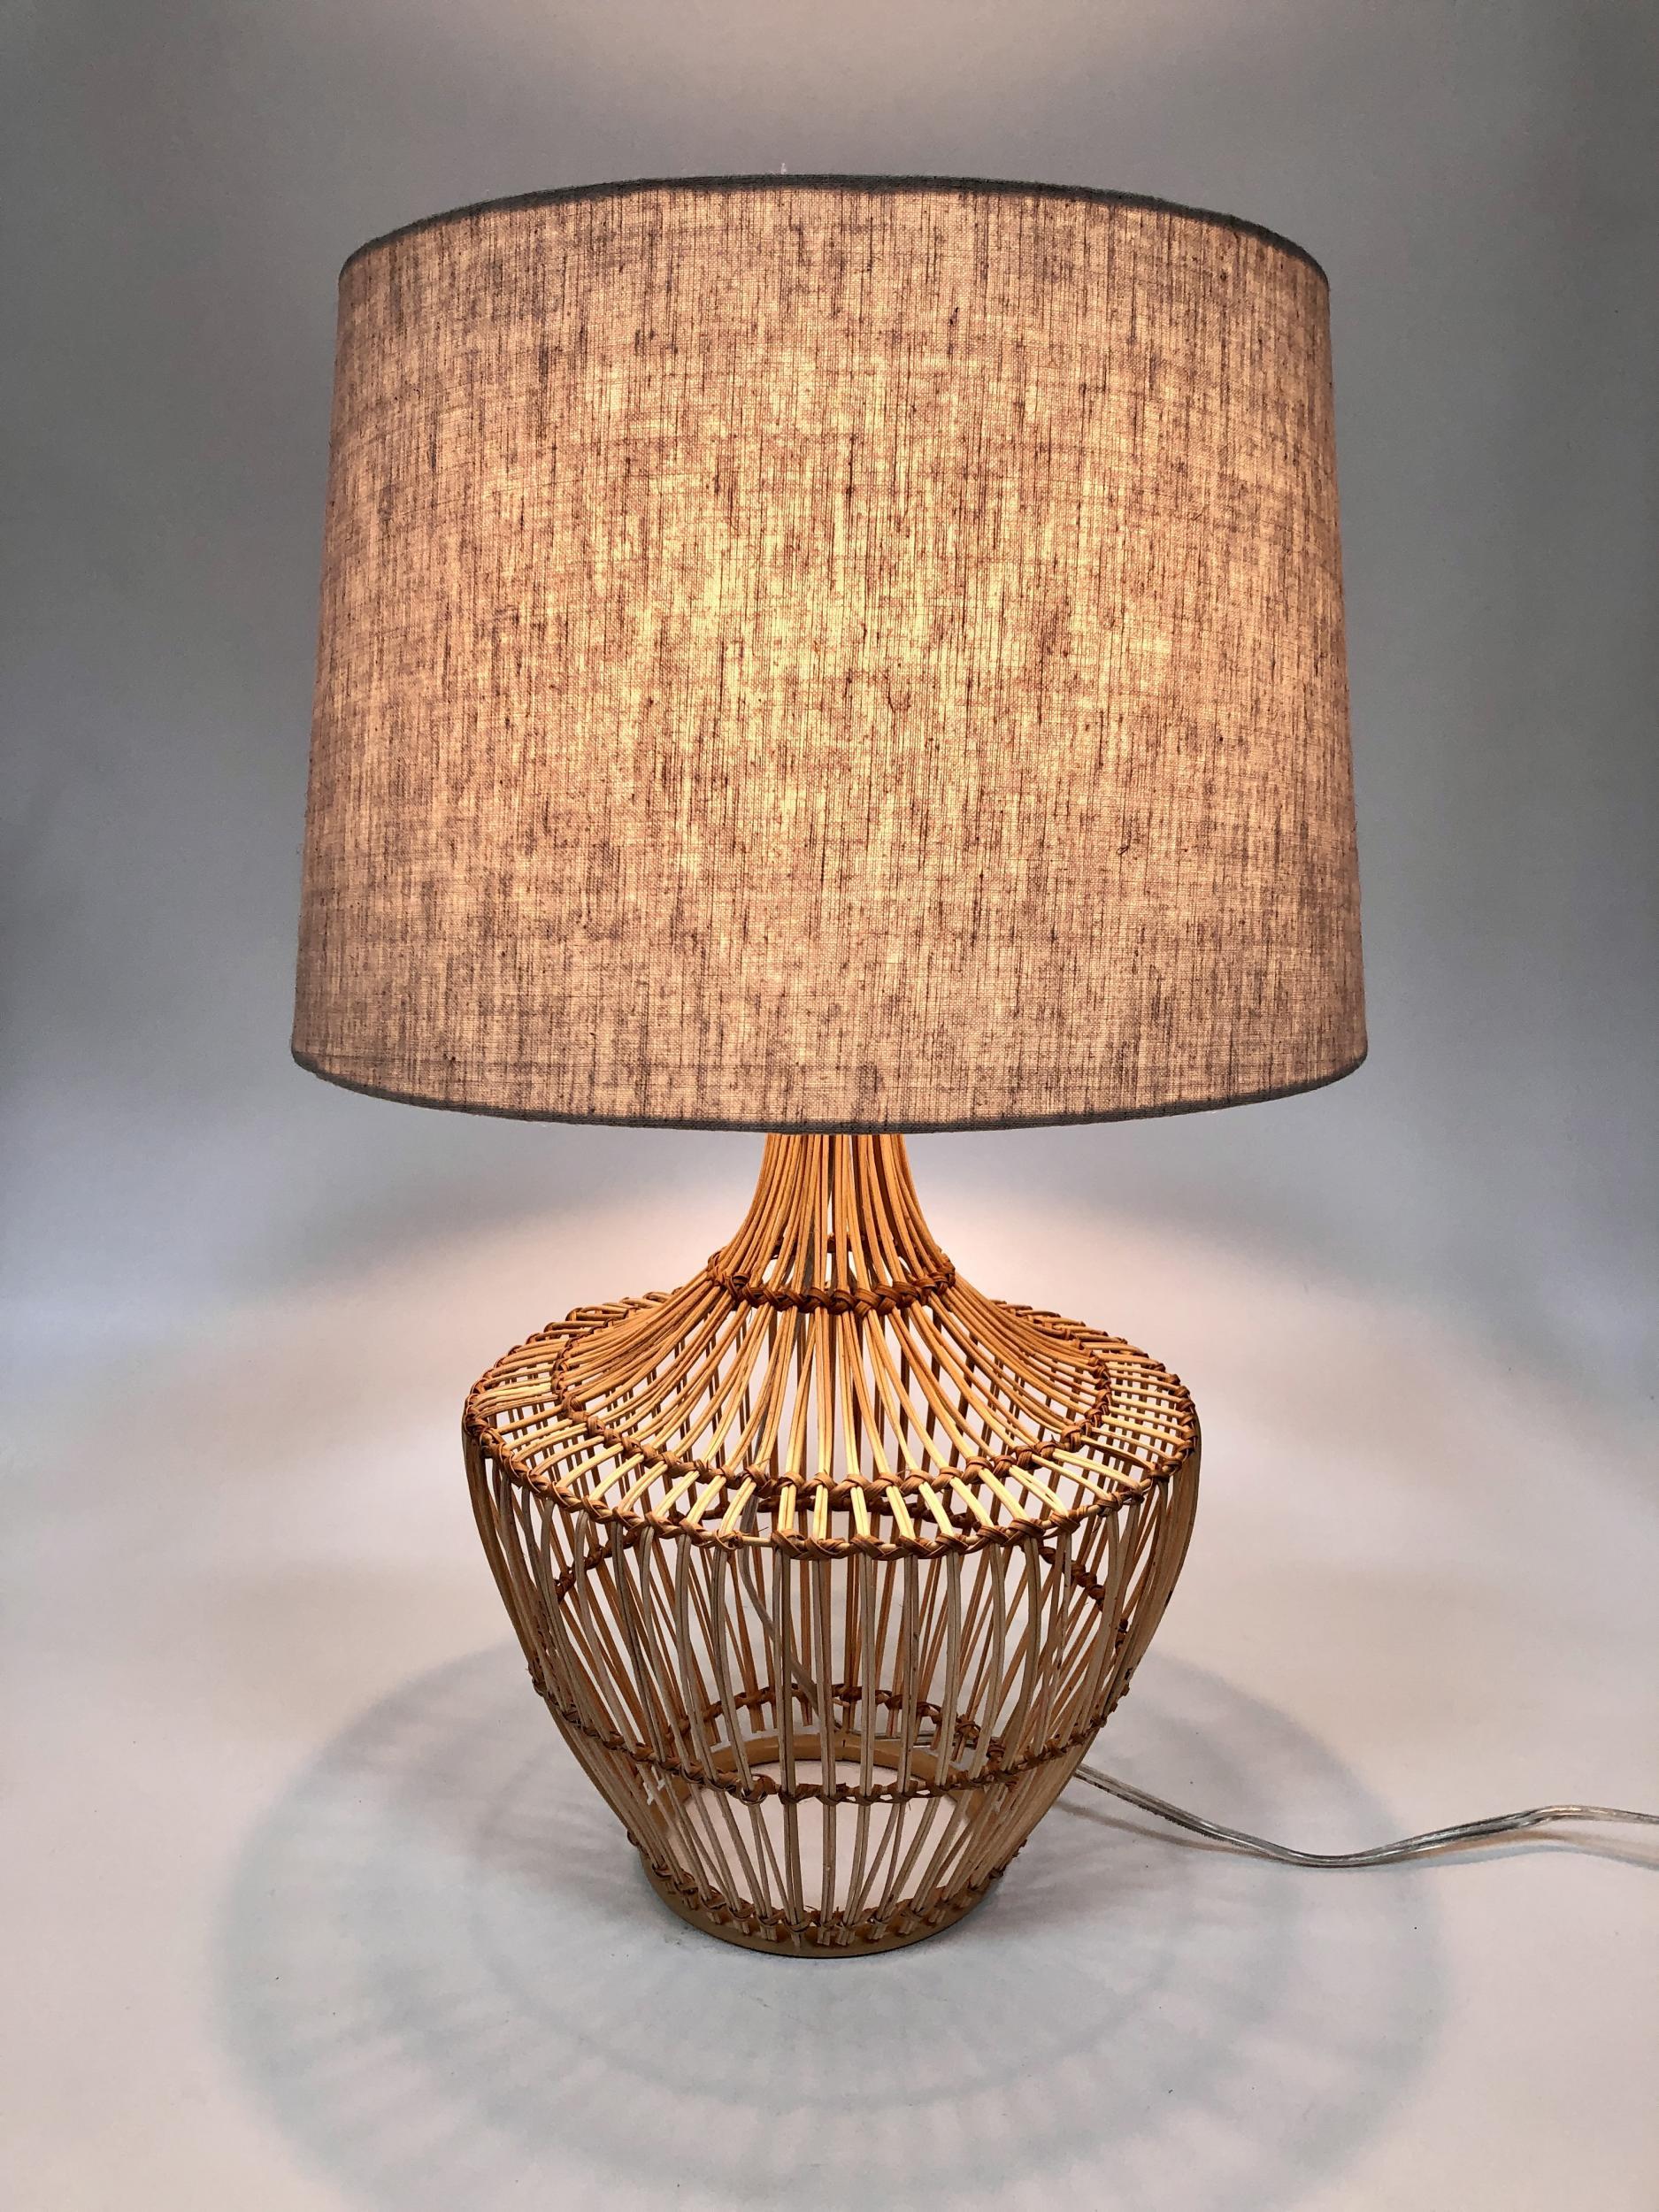 Large Albini style split rattan wicker wrapped basket weave table lamp pair, w/ shades

Lamp with shade: 23